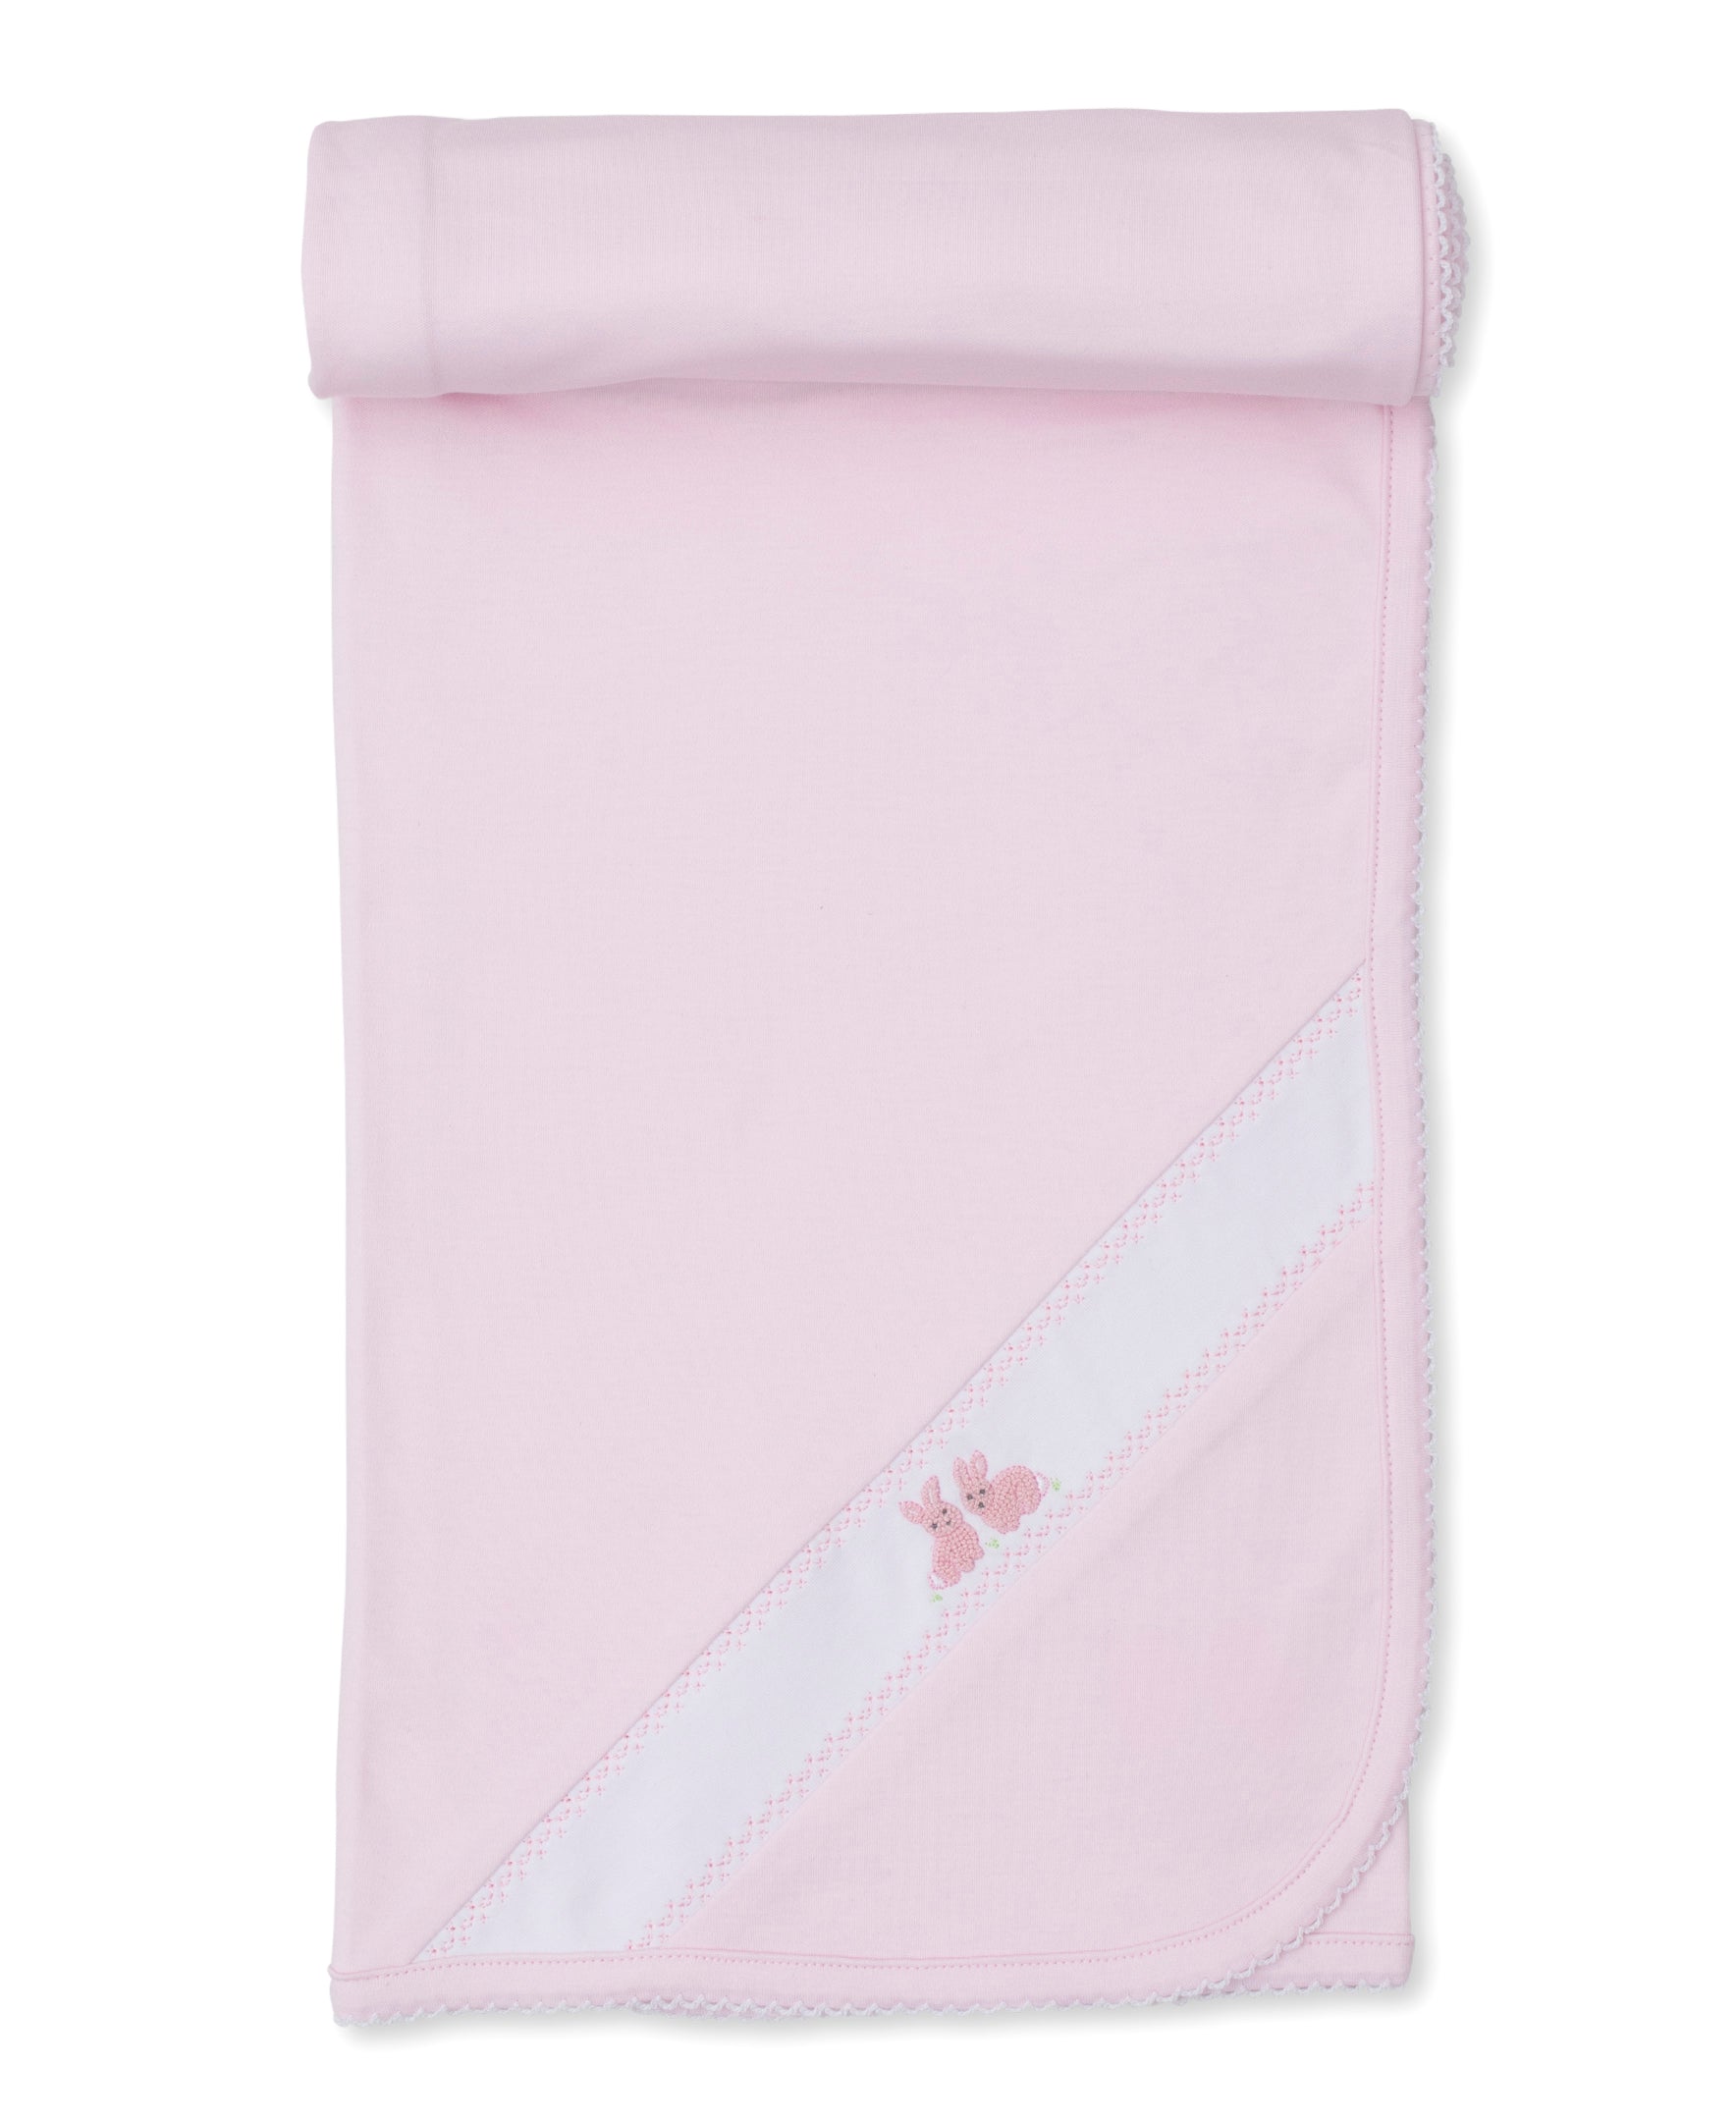 Premier Cottontail Hollows Pink Hand Emb. Blanket - Kissy Kissy